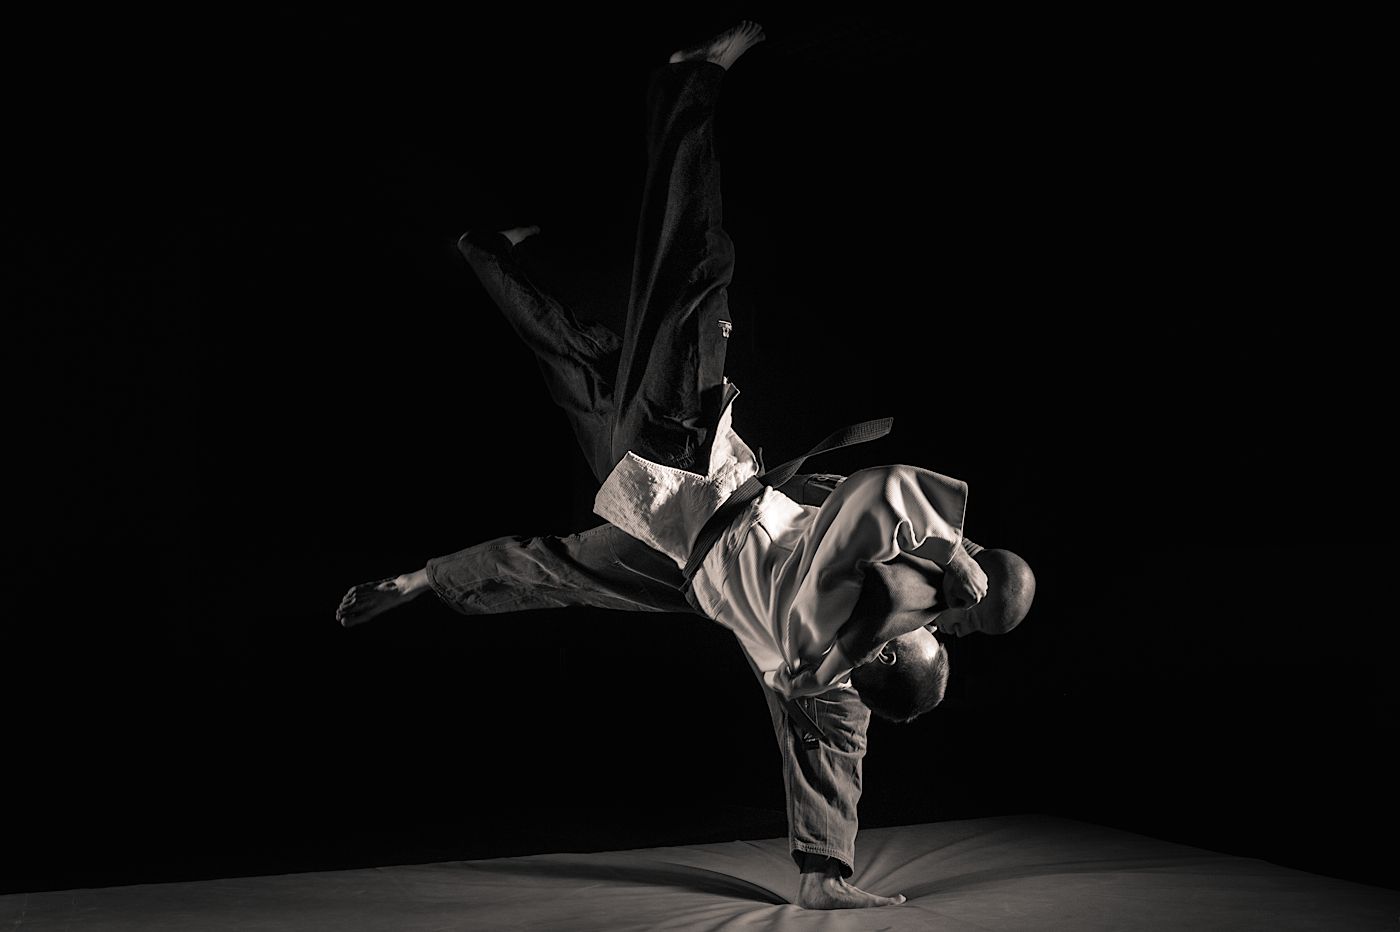 Judo Shooting.with Strobes and a Leica by Jochen Kohl. Steve Huff Photo